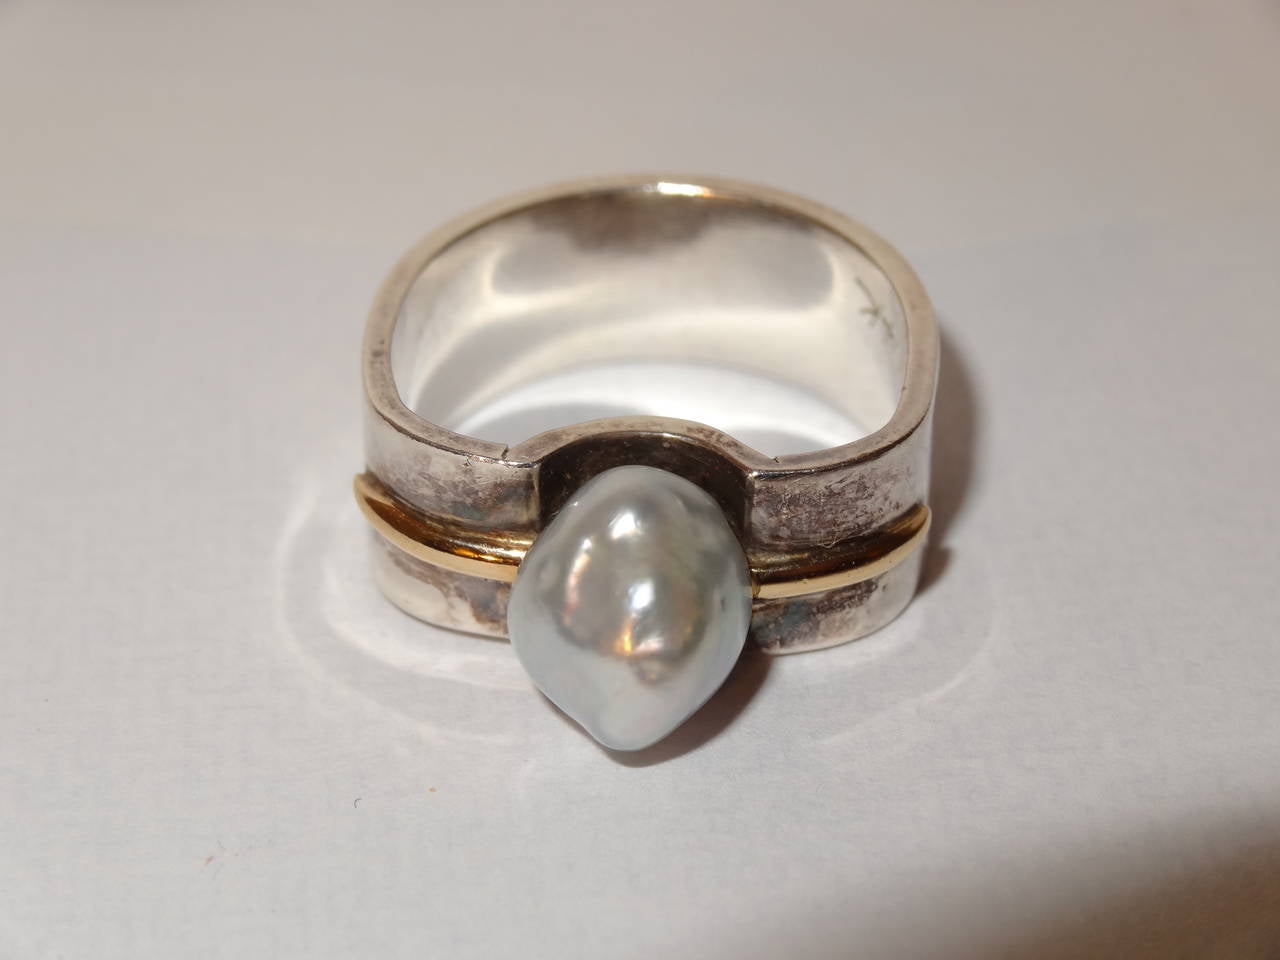 A modern ring by Kerber Design.
Ring is a modern organic formed shank of silver gold and set with a natural pearl. The pearl compliments the form and the mixed metal adds to the elegance of this piece.
Piece is signed and marked 14-karat and